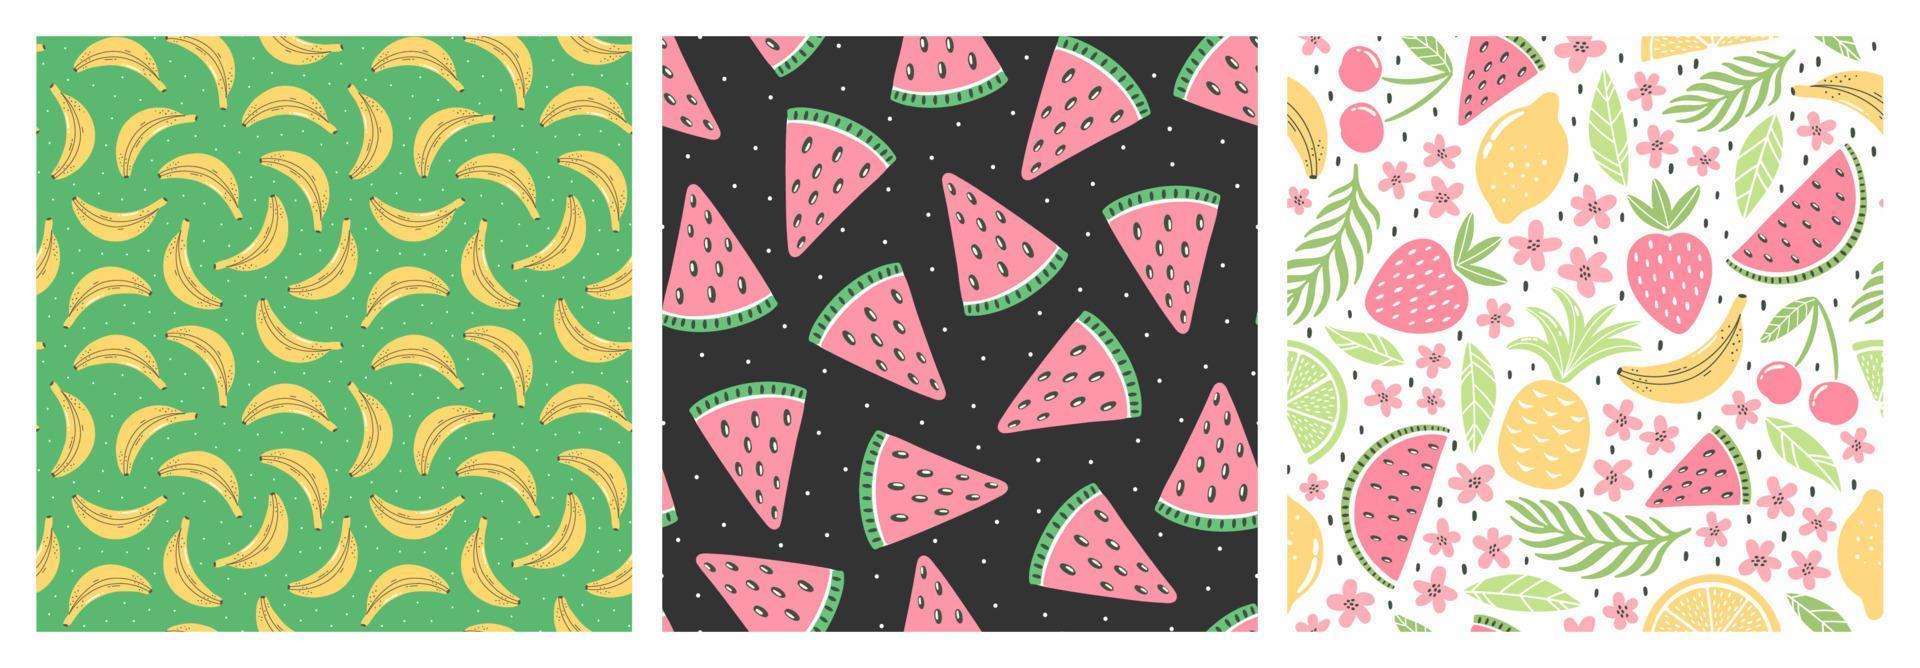 Set of seamless patterns with colorful fruits for textile design. Summer background in bright colors. Hand-drawn trendy vector illustrations.